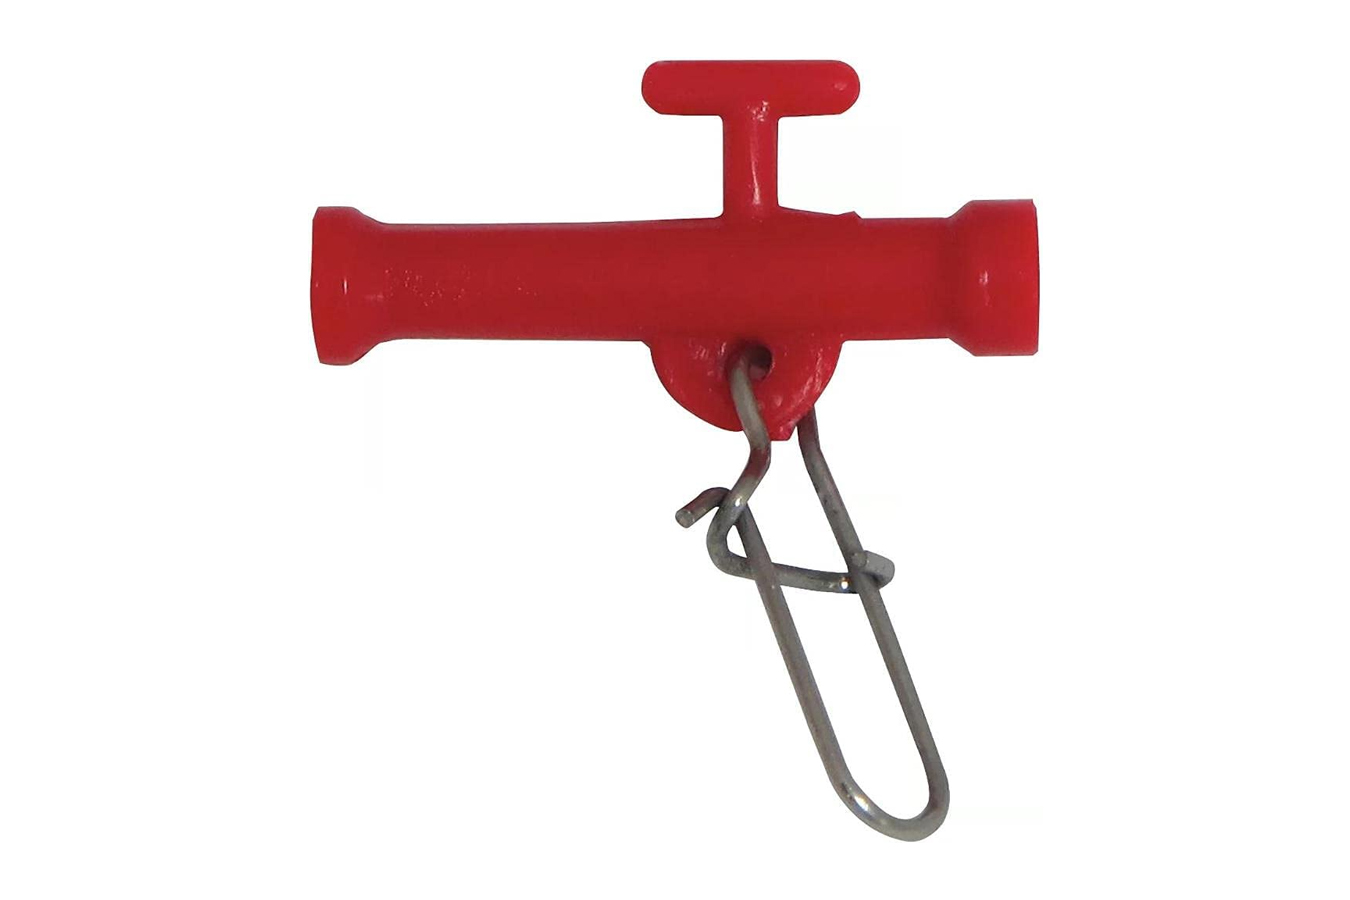 Discount P-line Sliding Swivel with Duolock Snap No. 3, Red for